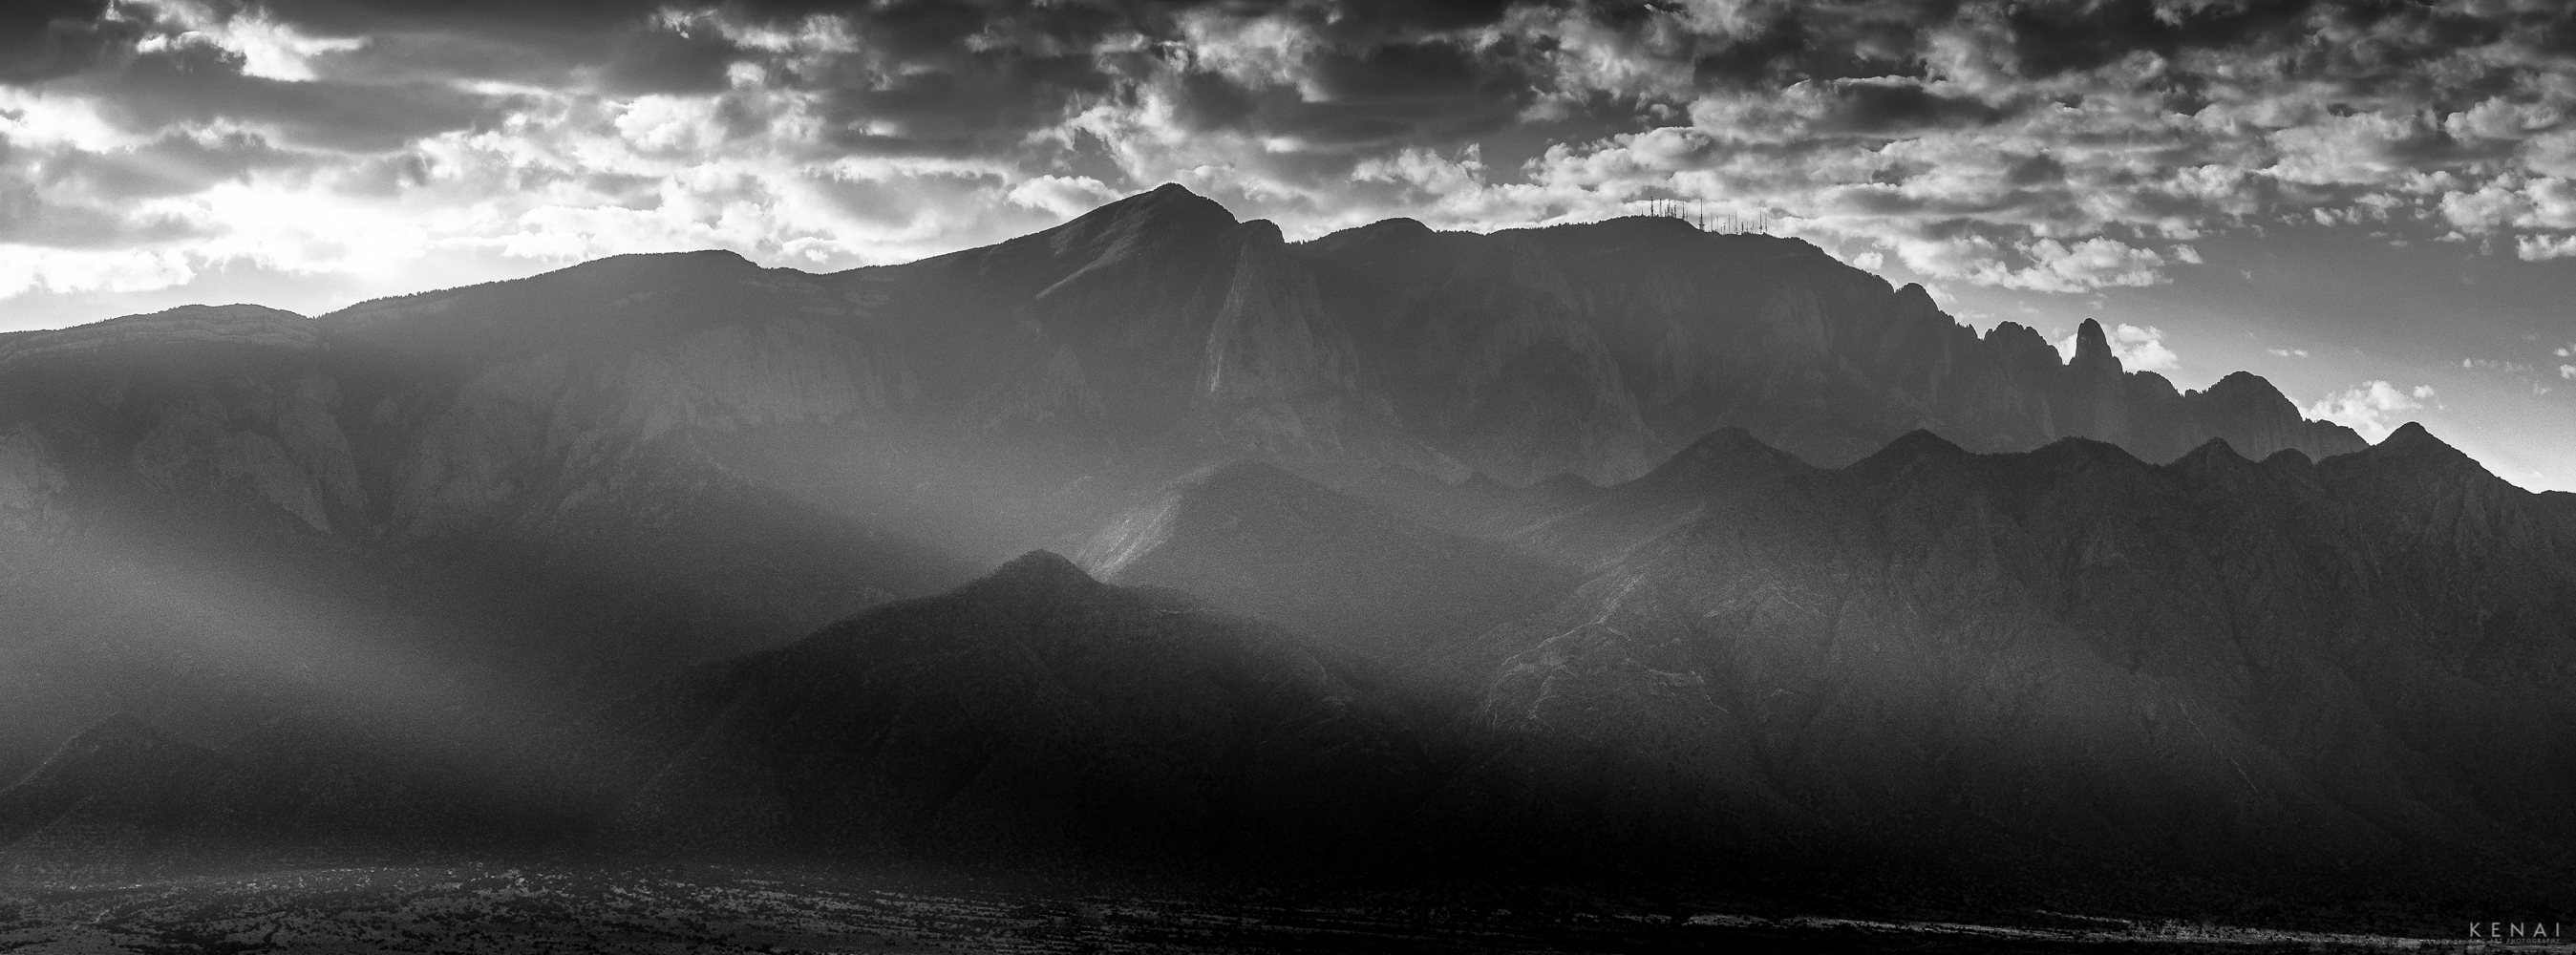 North Sandia Mountains illuminated by early morning sun rays in this black and white landscape photo. 